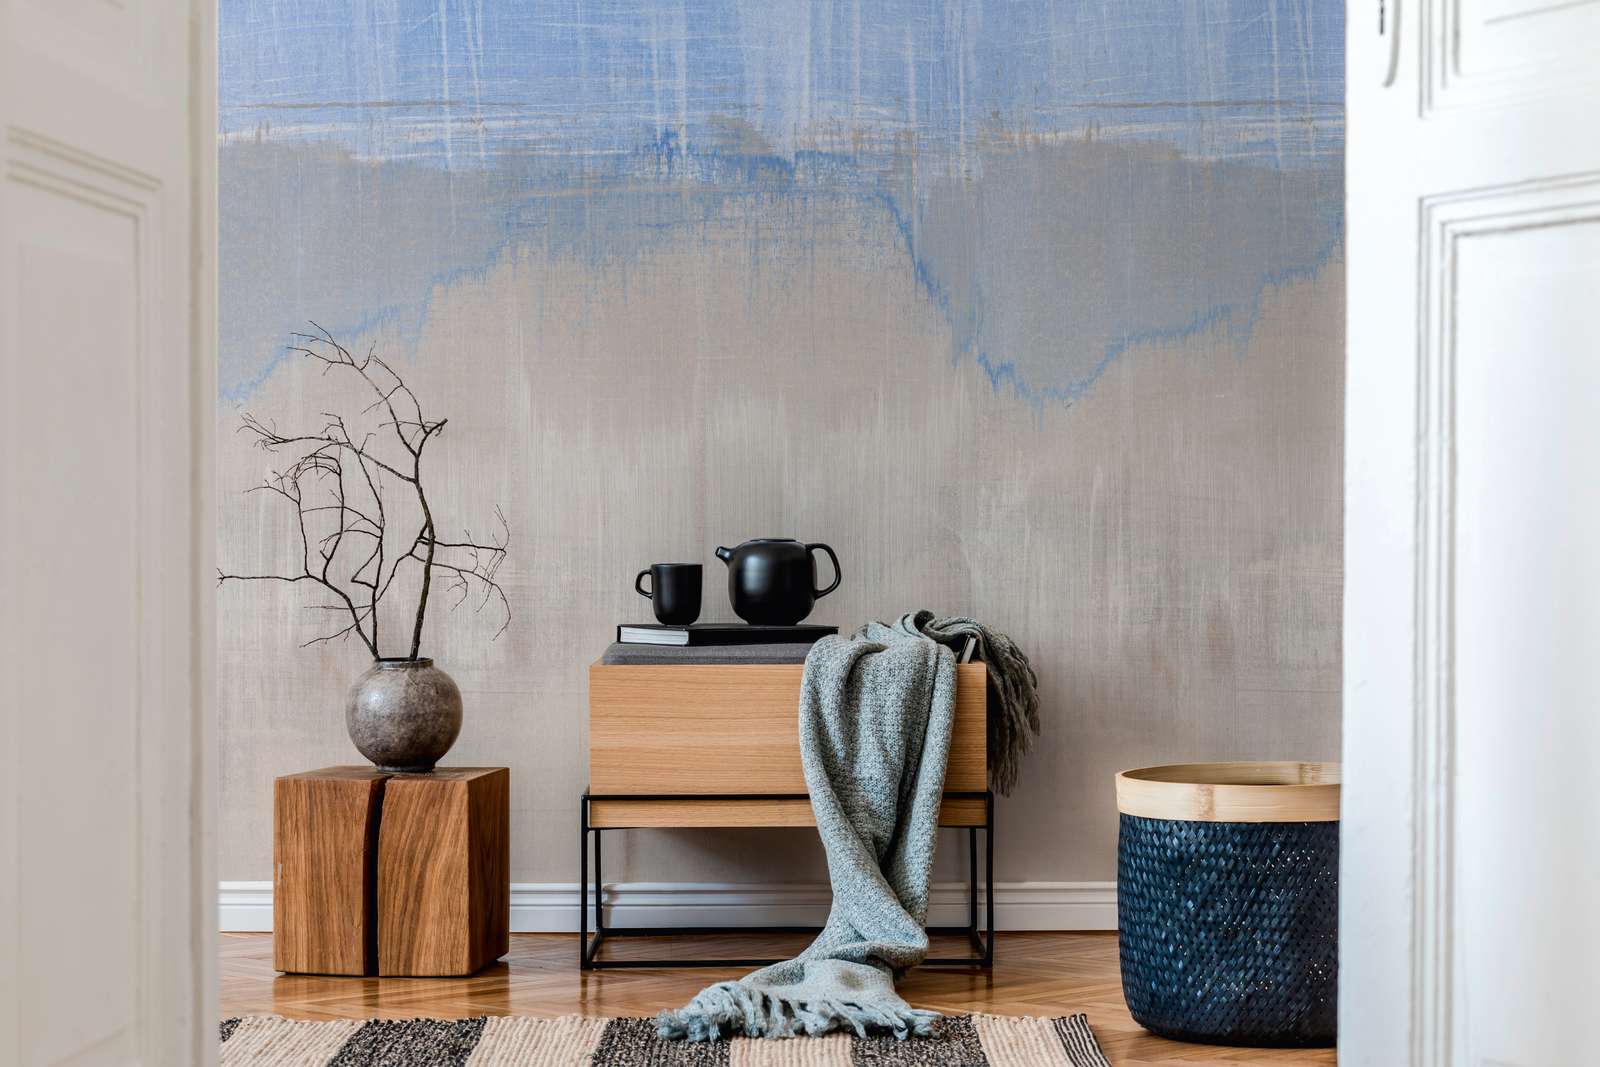             Non-woven wallpaper in watercolour used look - blue, grey
        